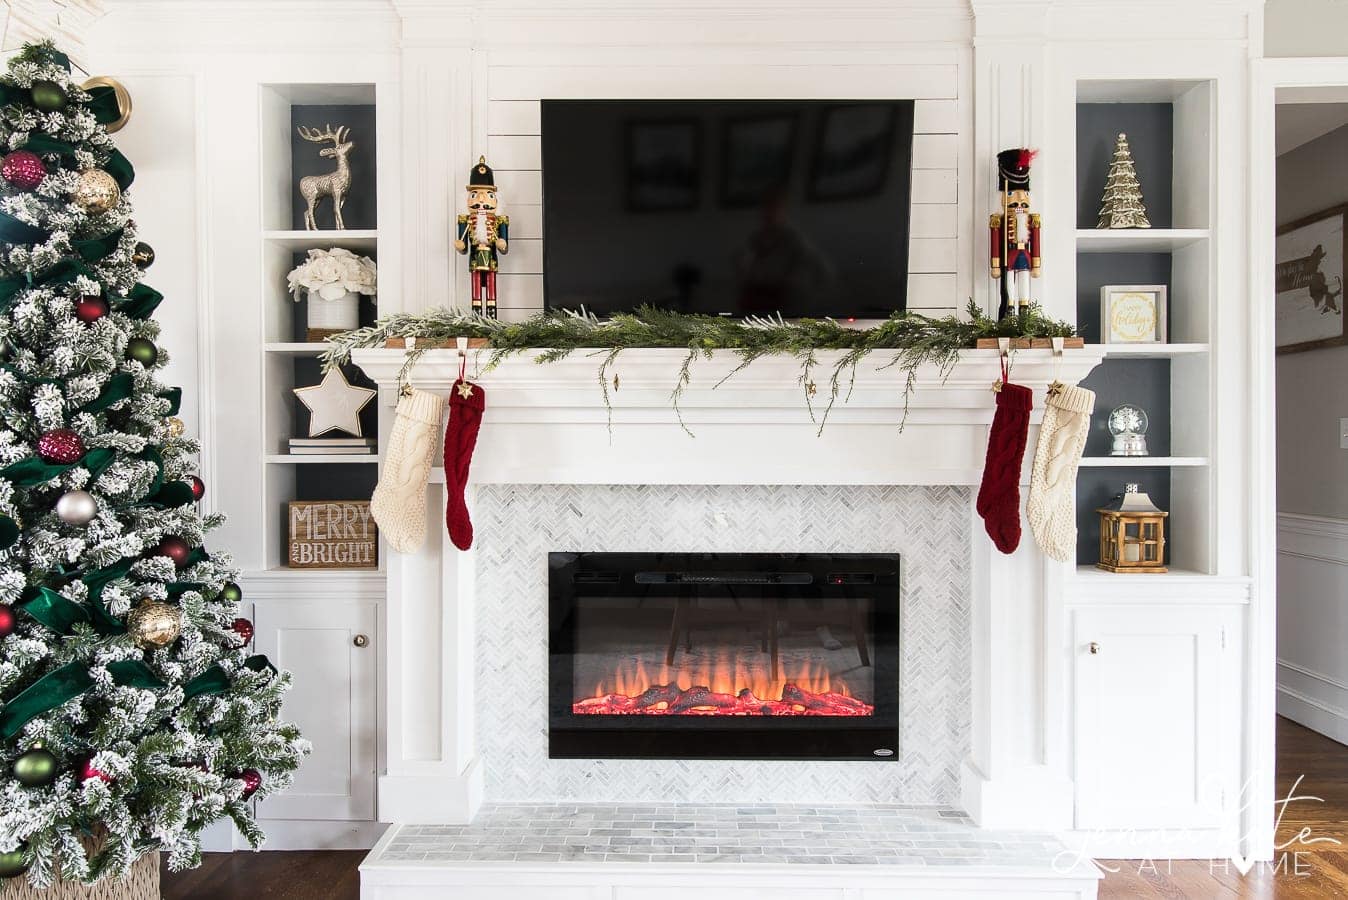 How to build a fireplace mantel from scratch